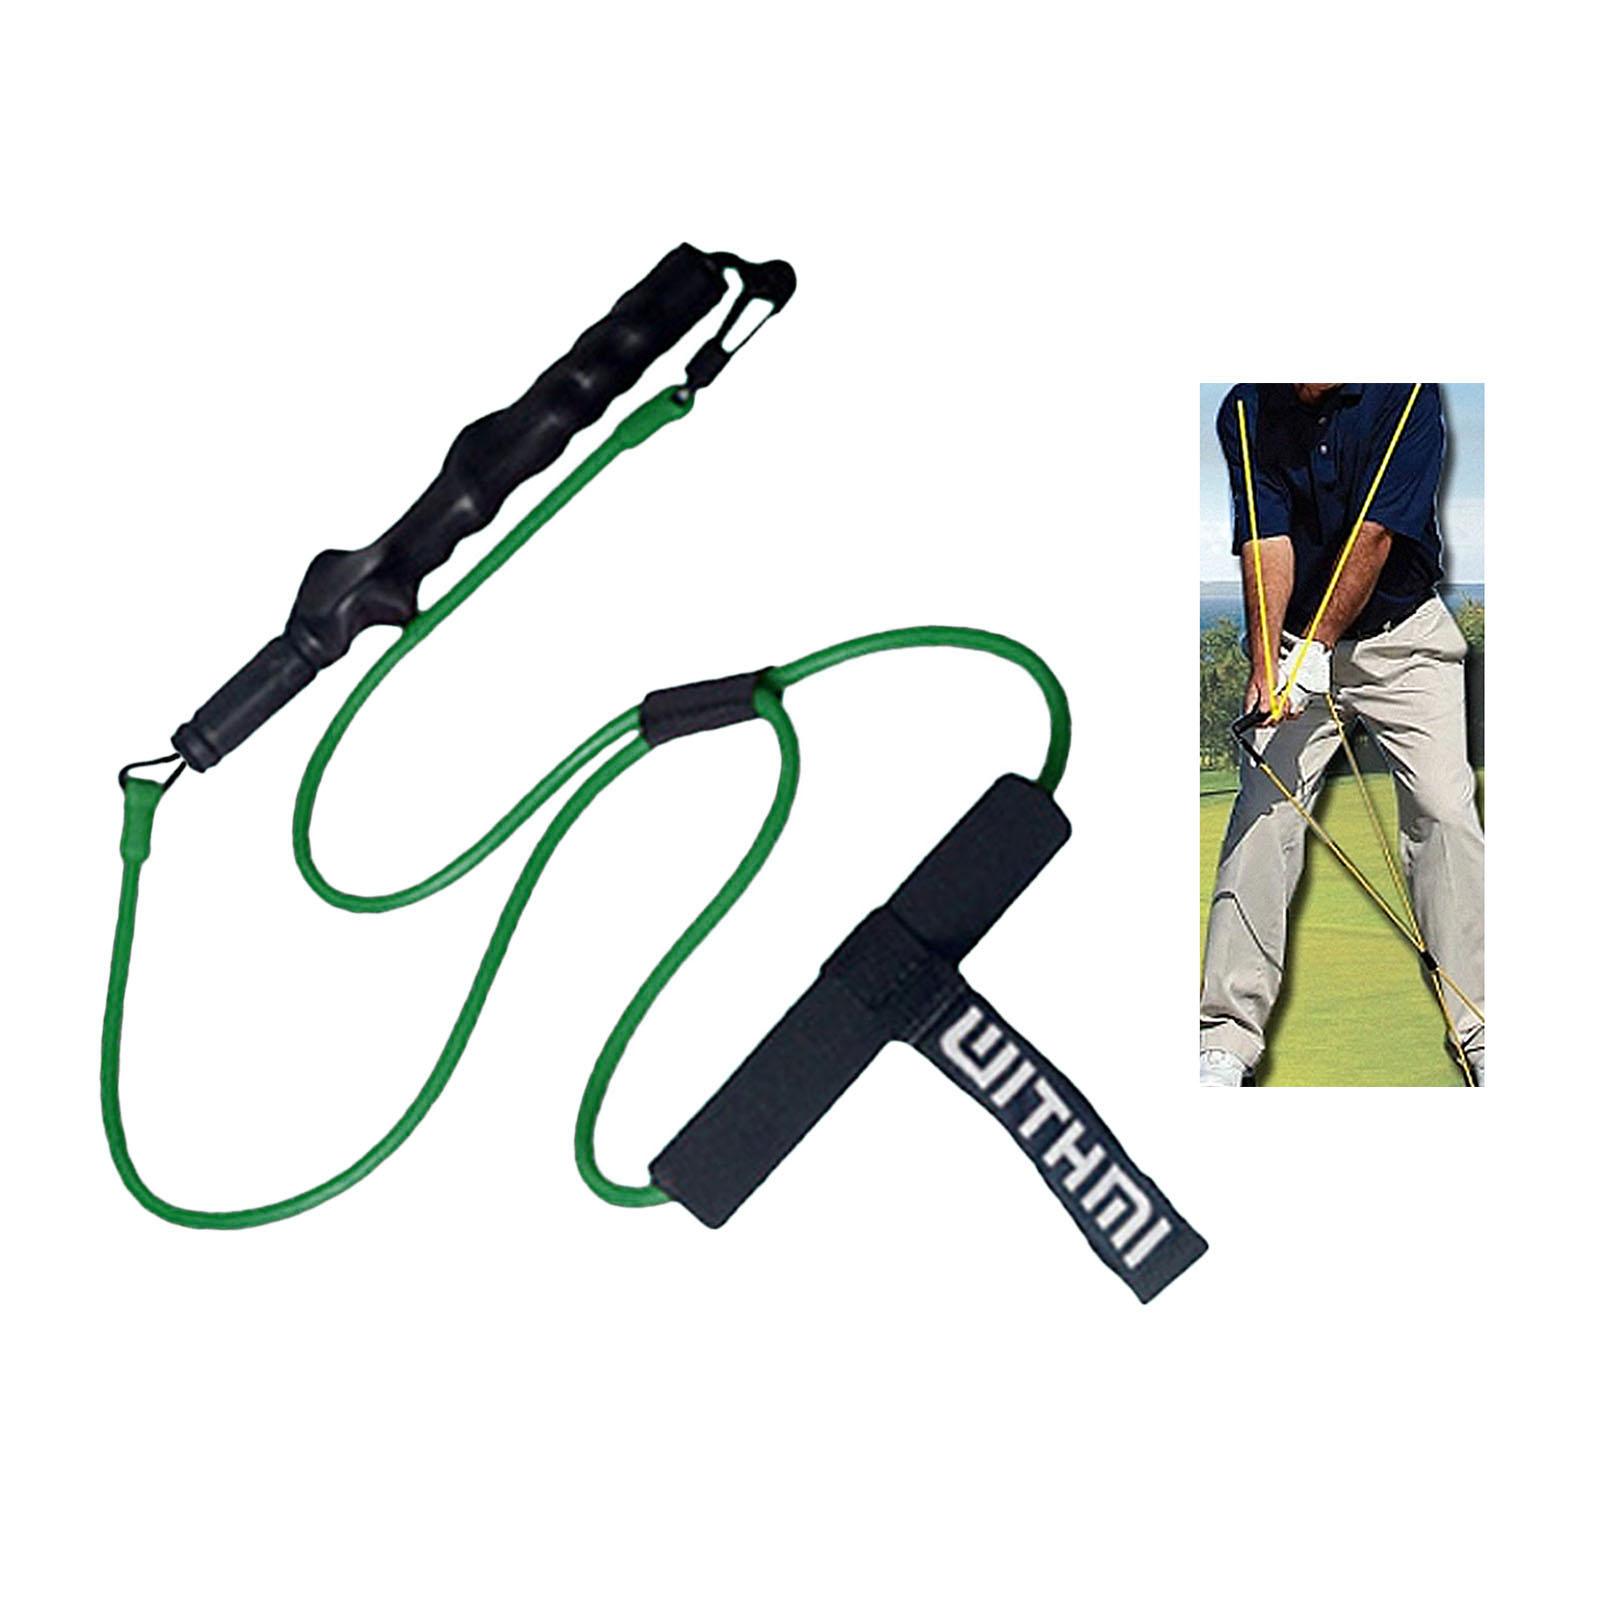 Resistance Bands Golf Yoga Warm Up Activation Training Aid Fitness Green